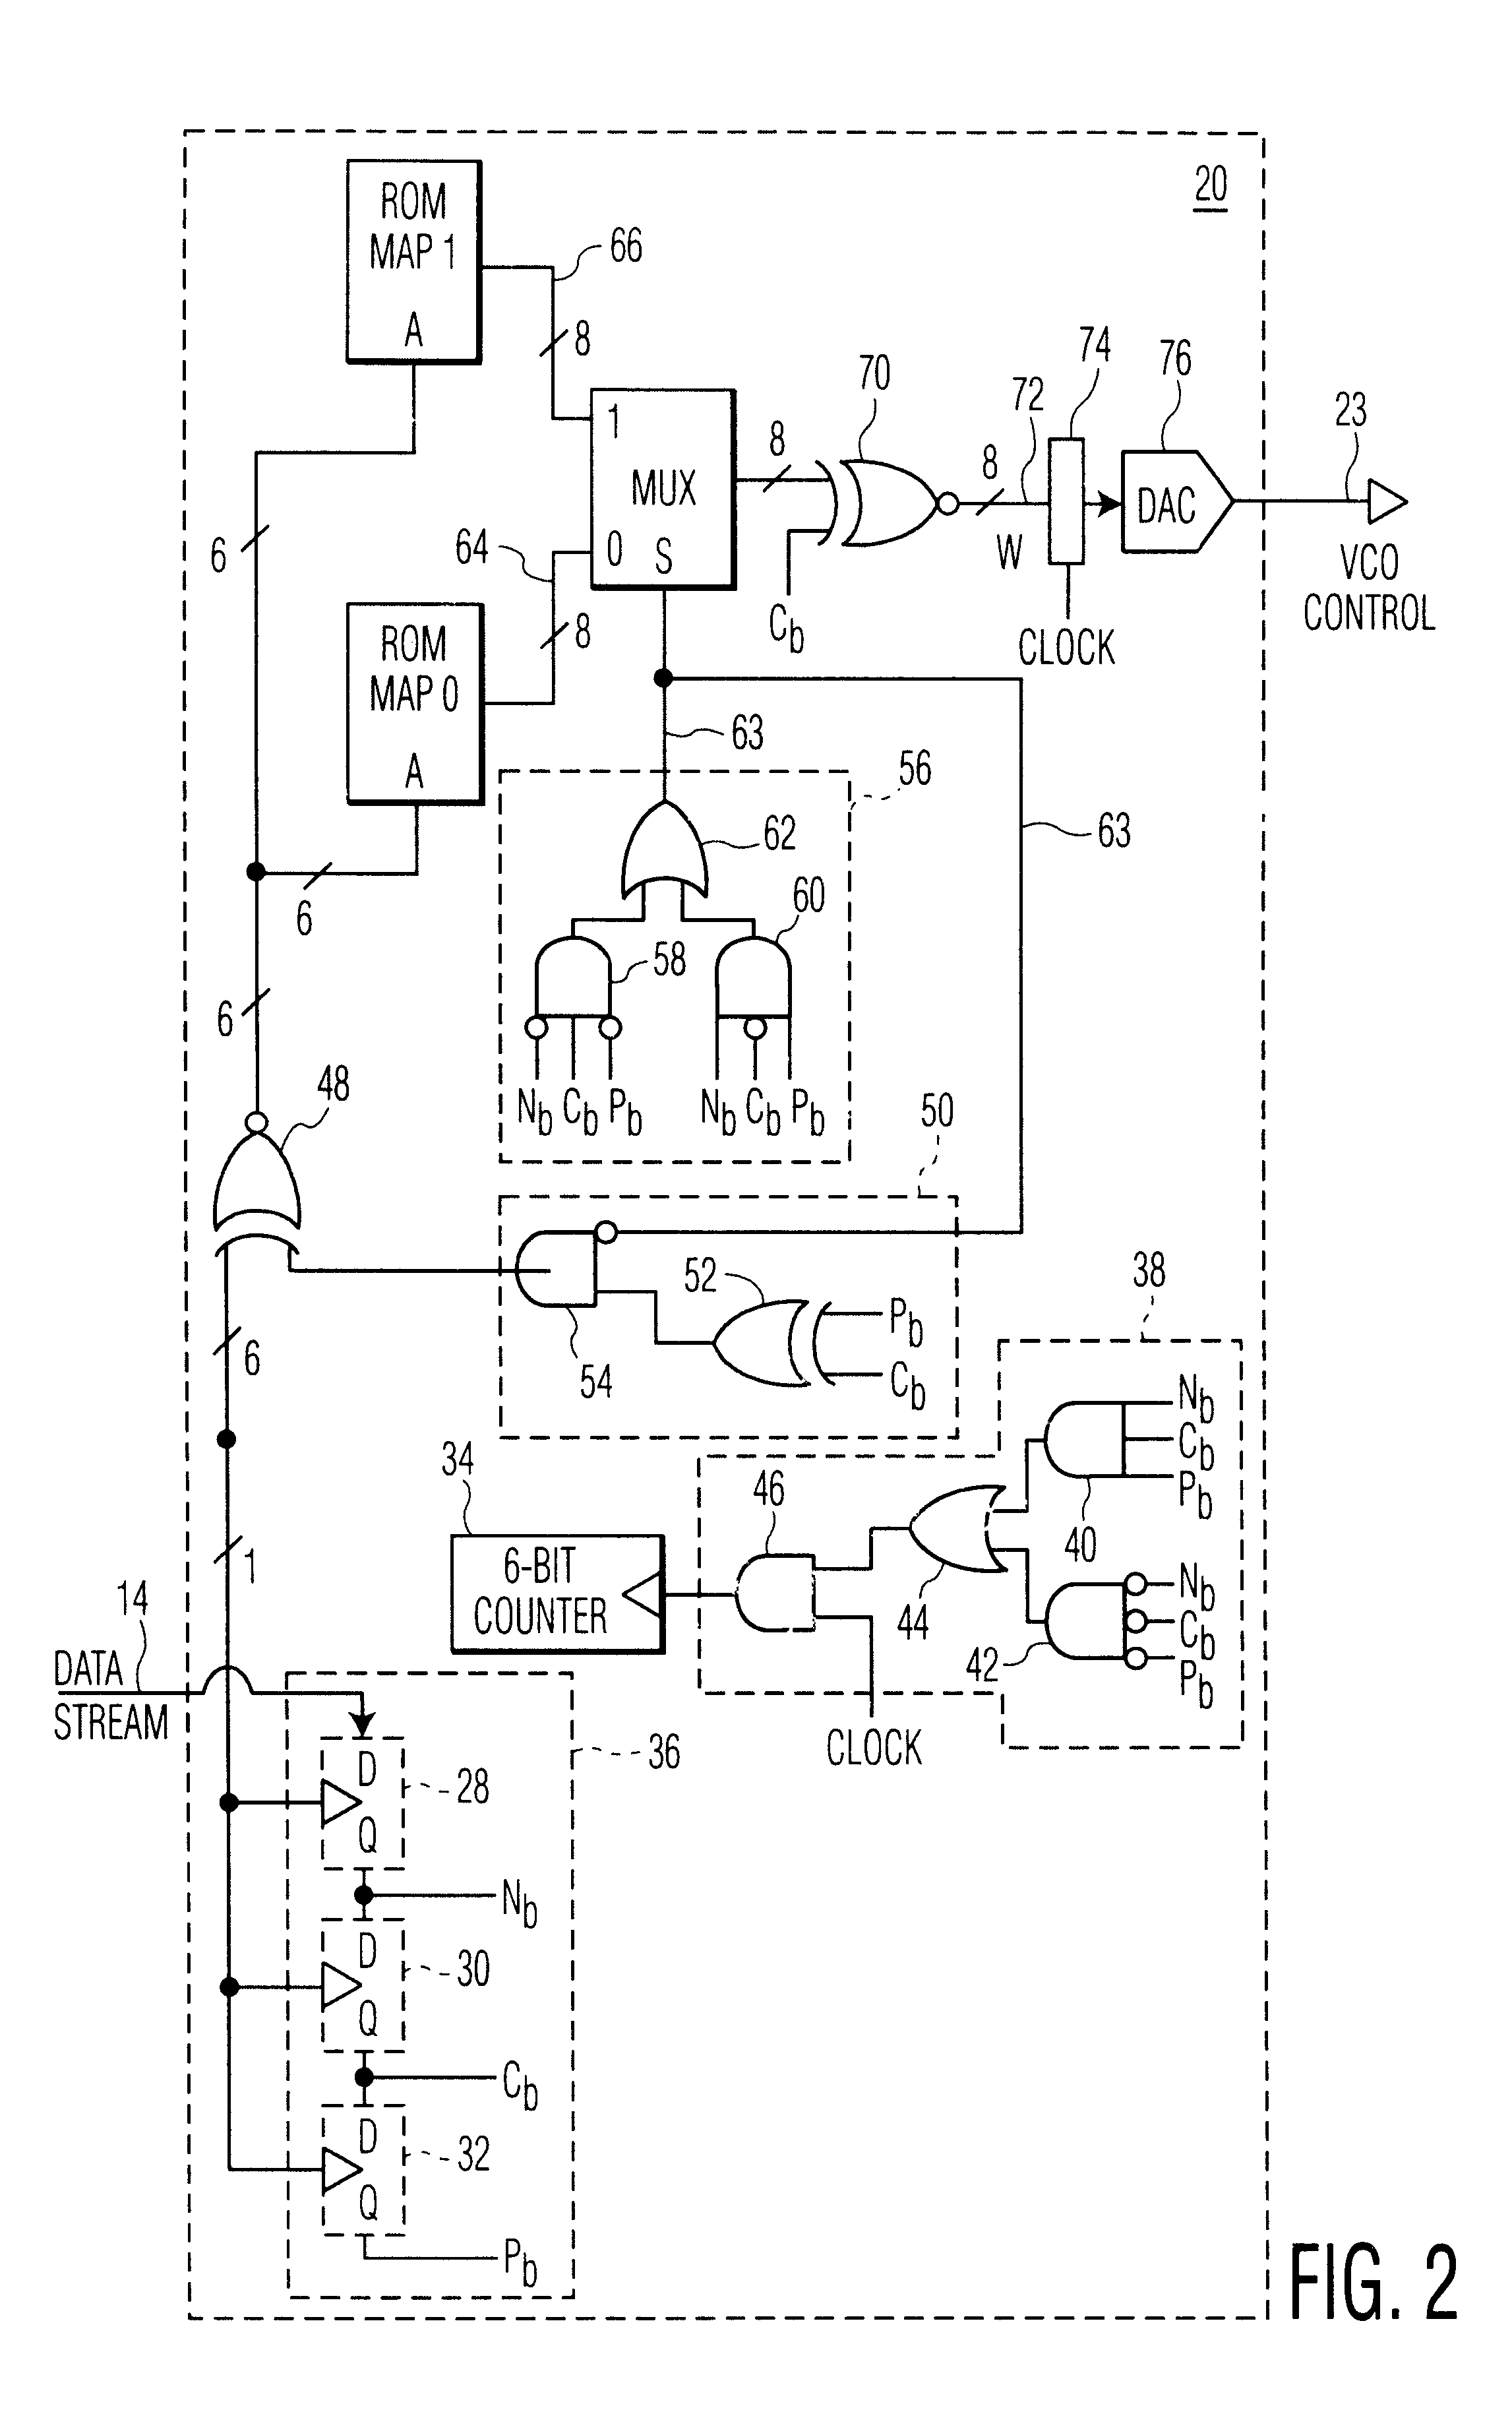 Method and apparatus for VCO modulation in a communication system